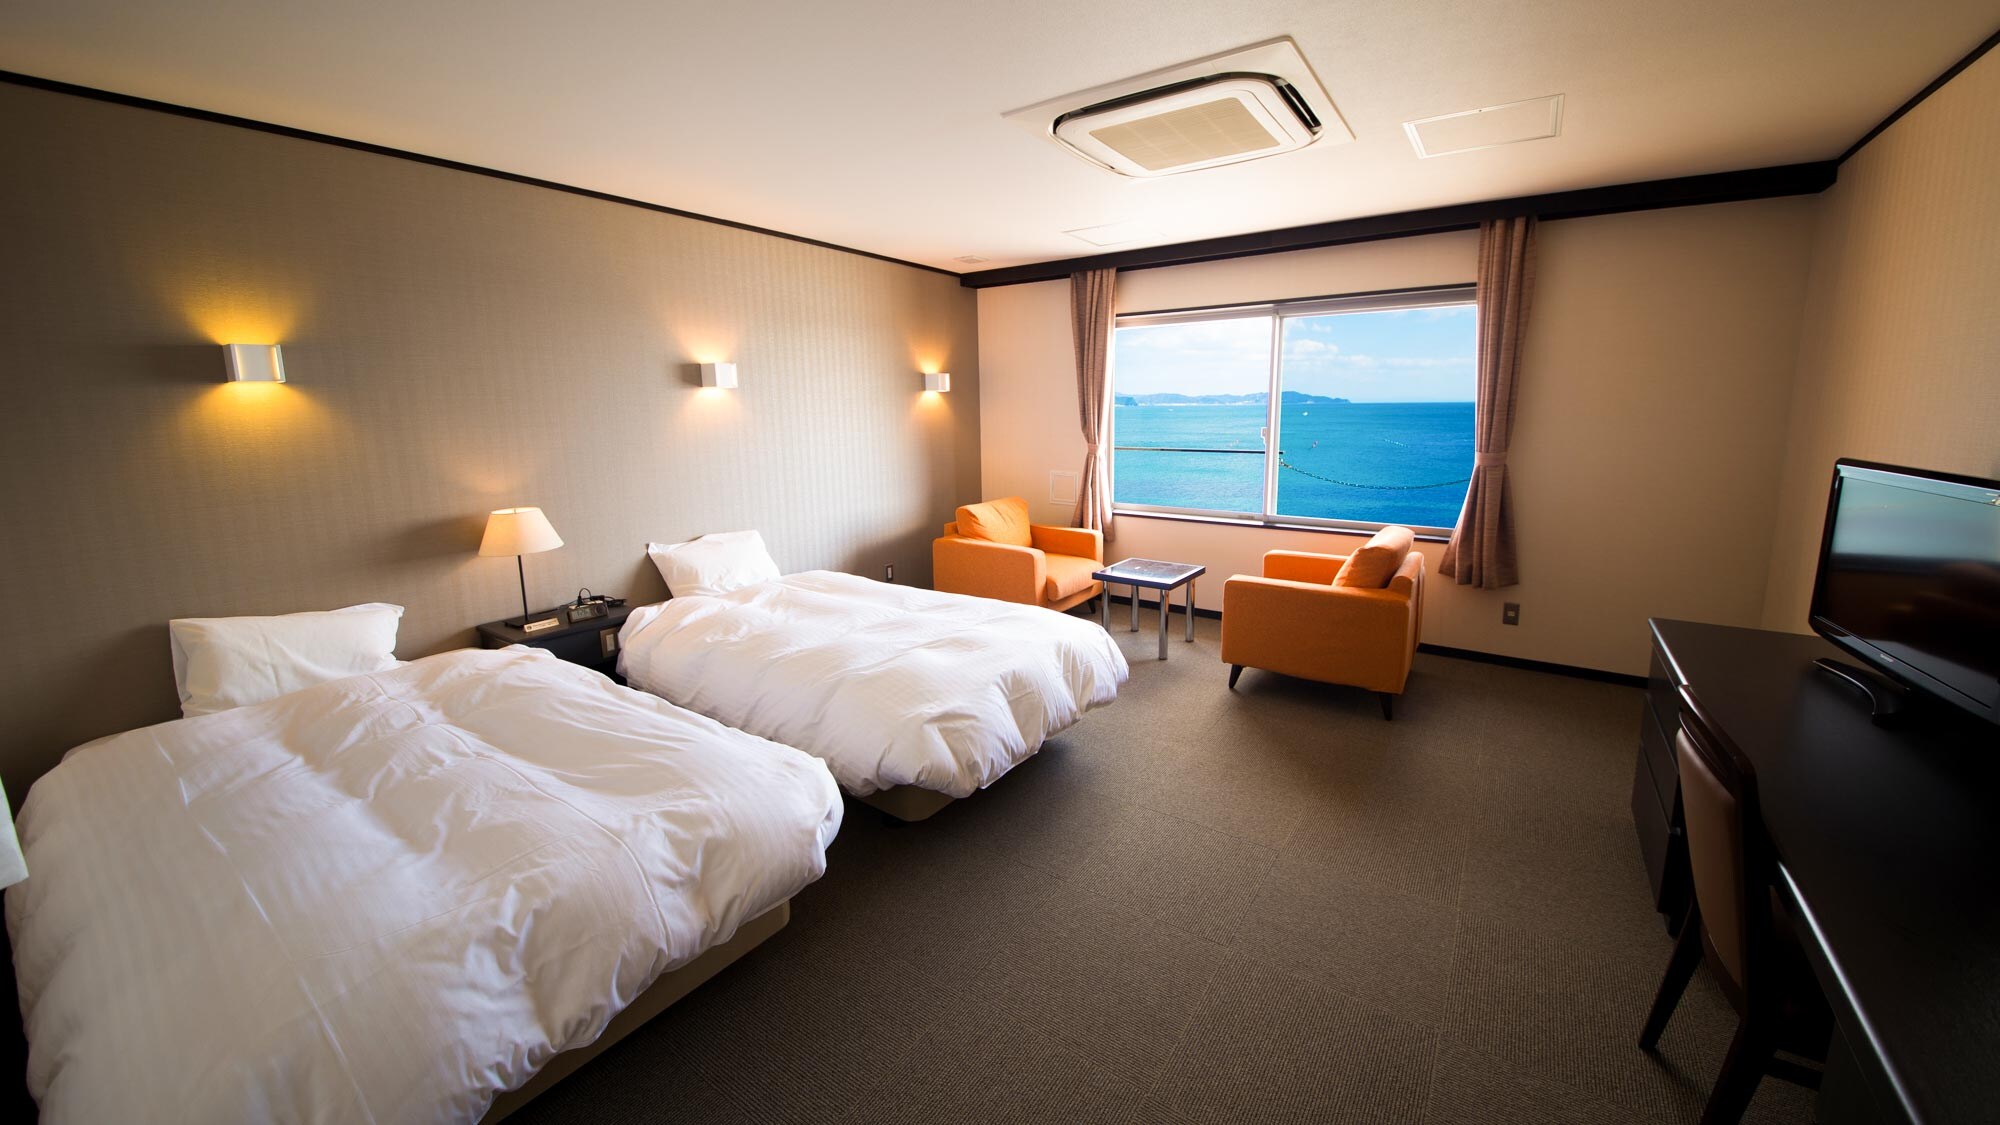  Ocean view Western-style twin room ☆ No smoking